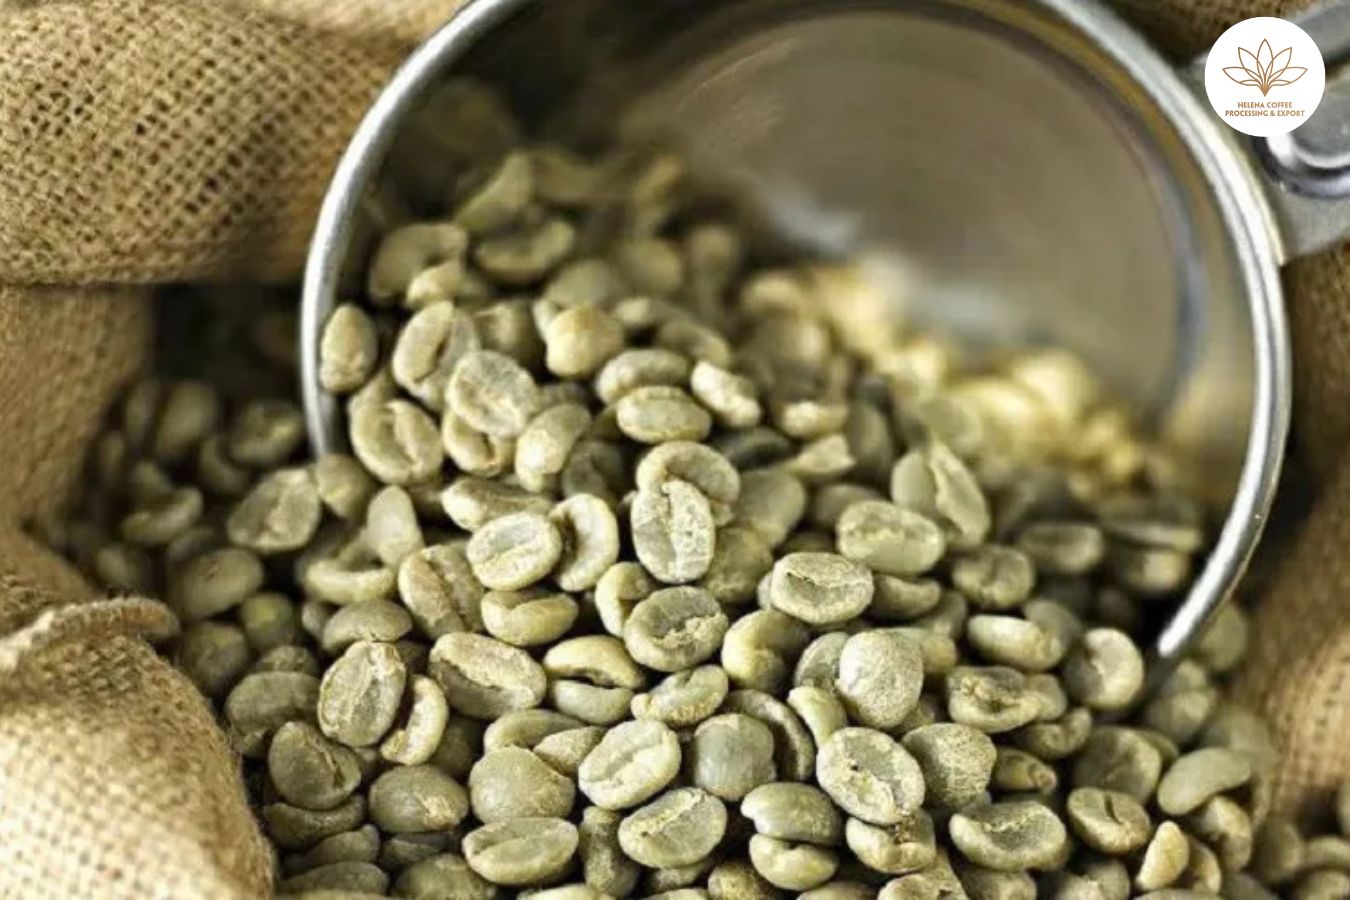 Where To Buy Wholesale Coffee Beans